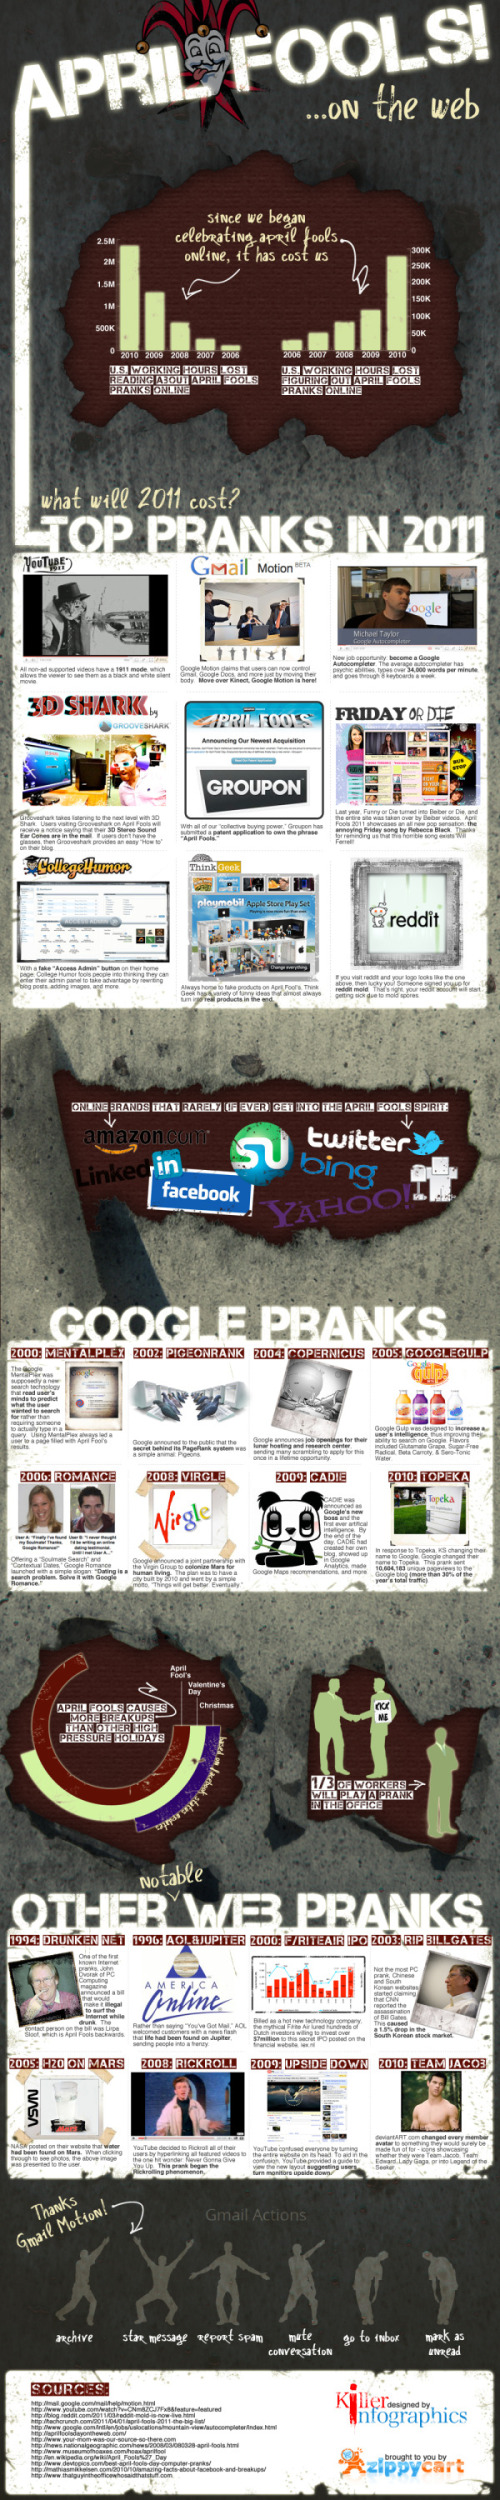 April Fools 2011 On The Web infographic